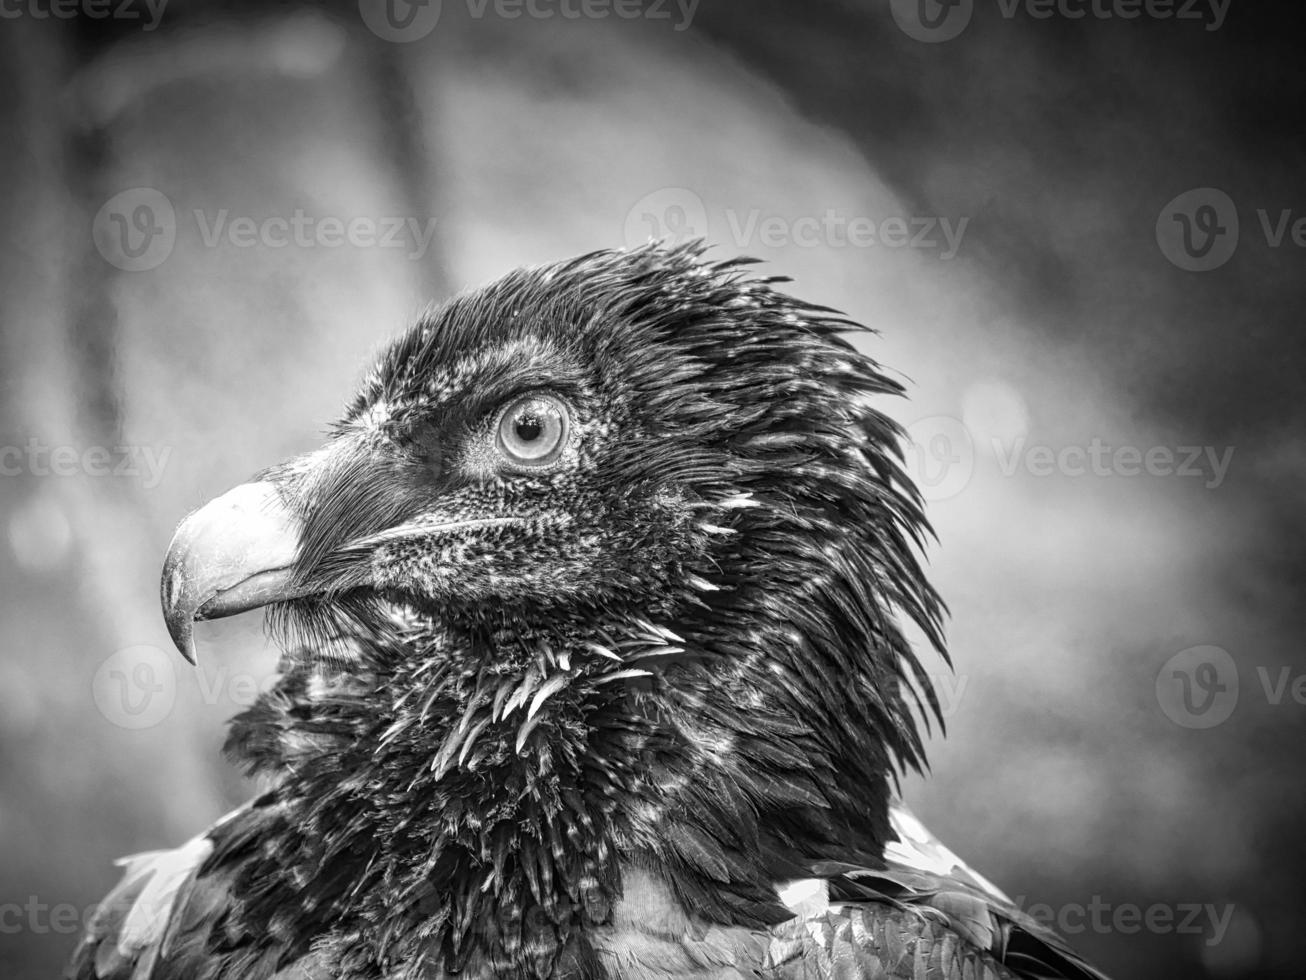 A vulture portrait in black and white. White black feathers. A very expressive bird photo